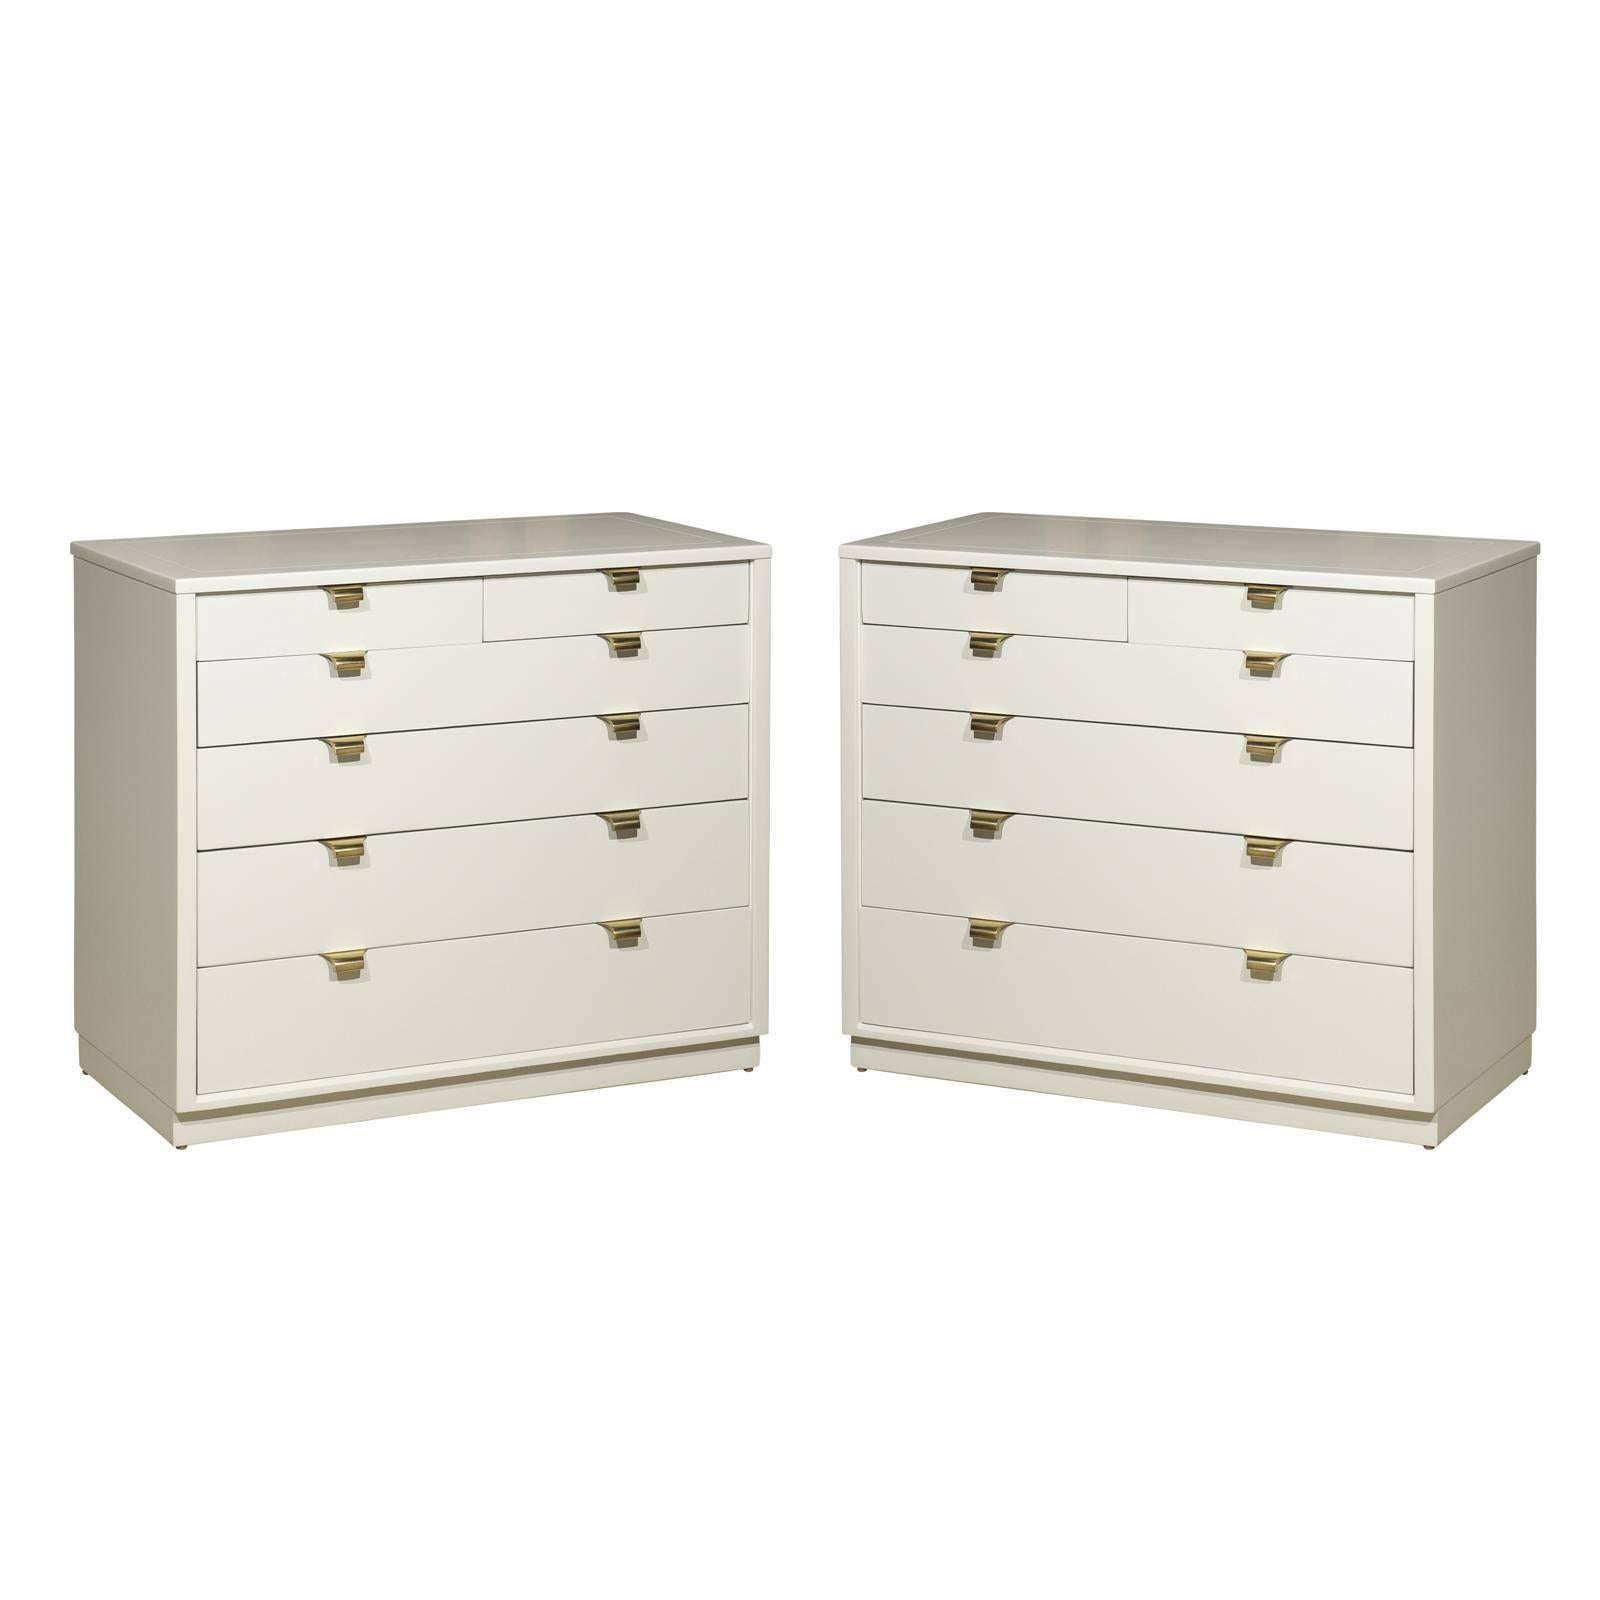 Restored Pair of Chests by Edward Wormley, circa 1947